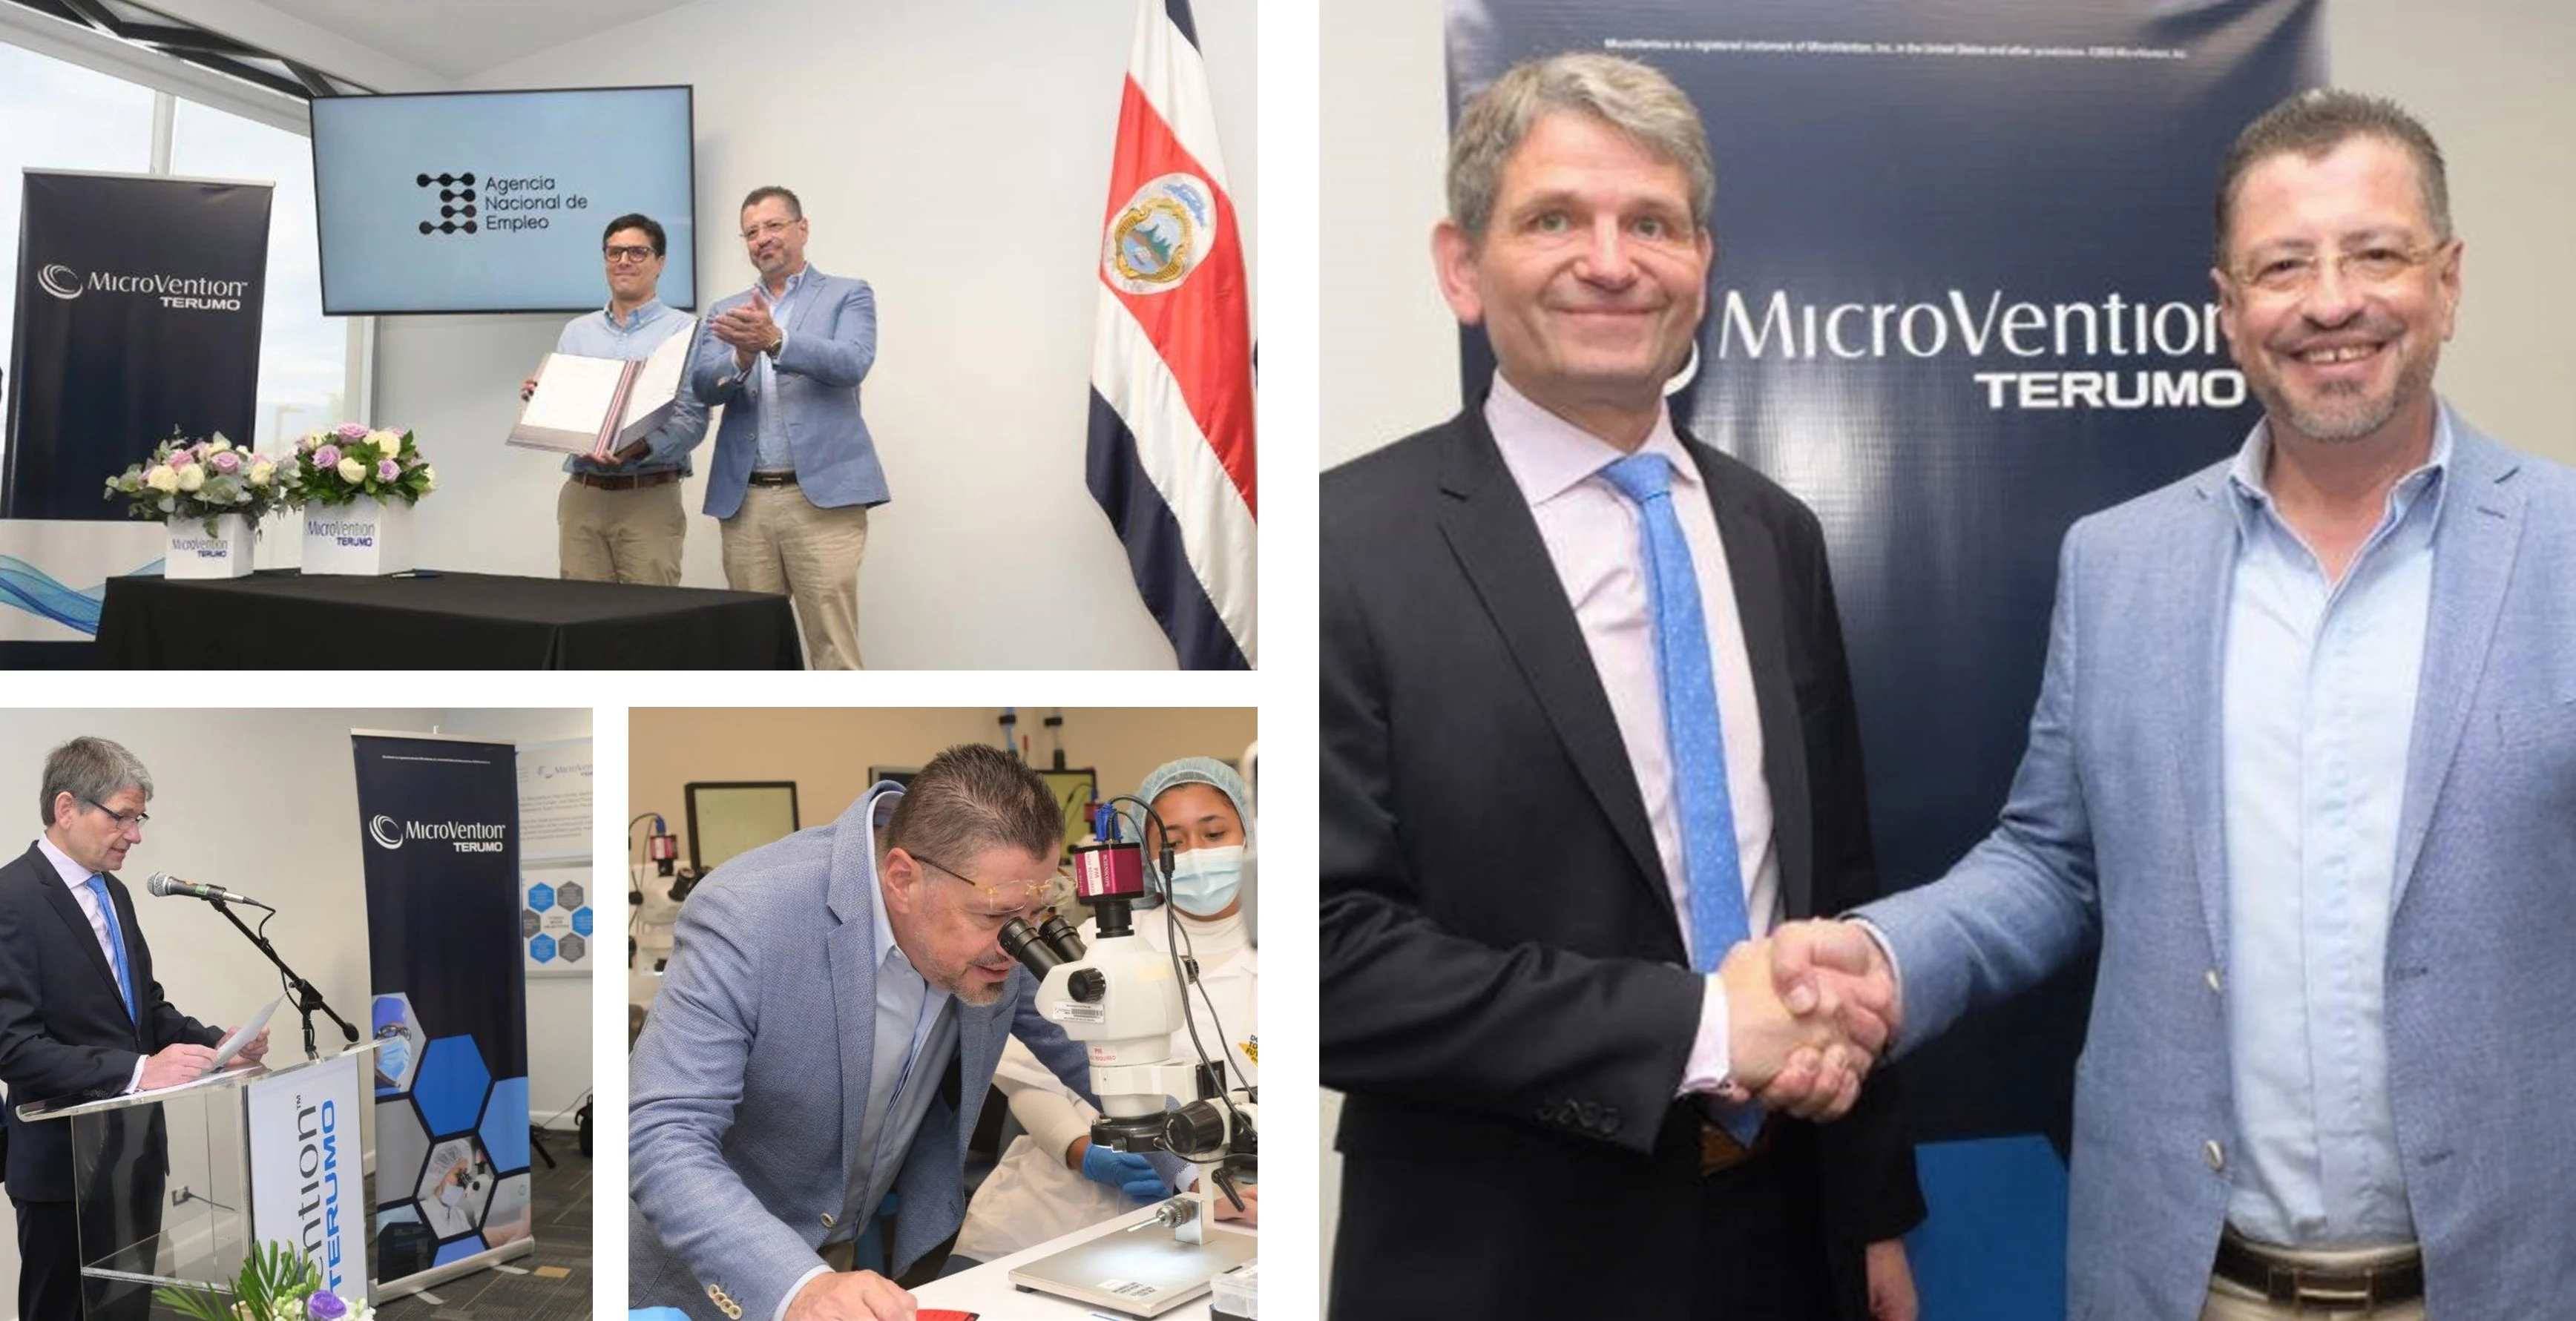 Costa Rica's President Rodrigo Chaves Robles Recognizes MicroVention's Achievements with its Door To The Future Program and Signs National Employment Program Decree at MicroVention